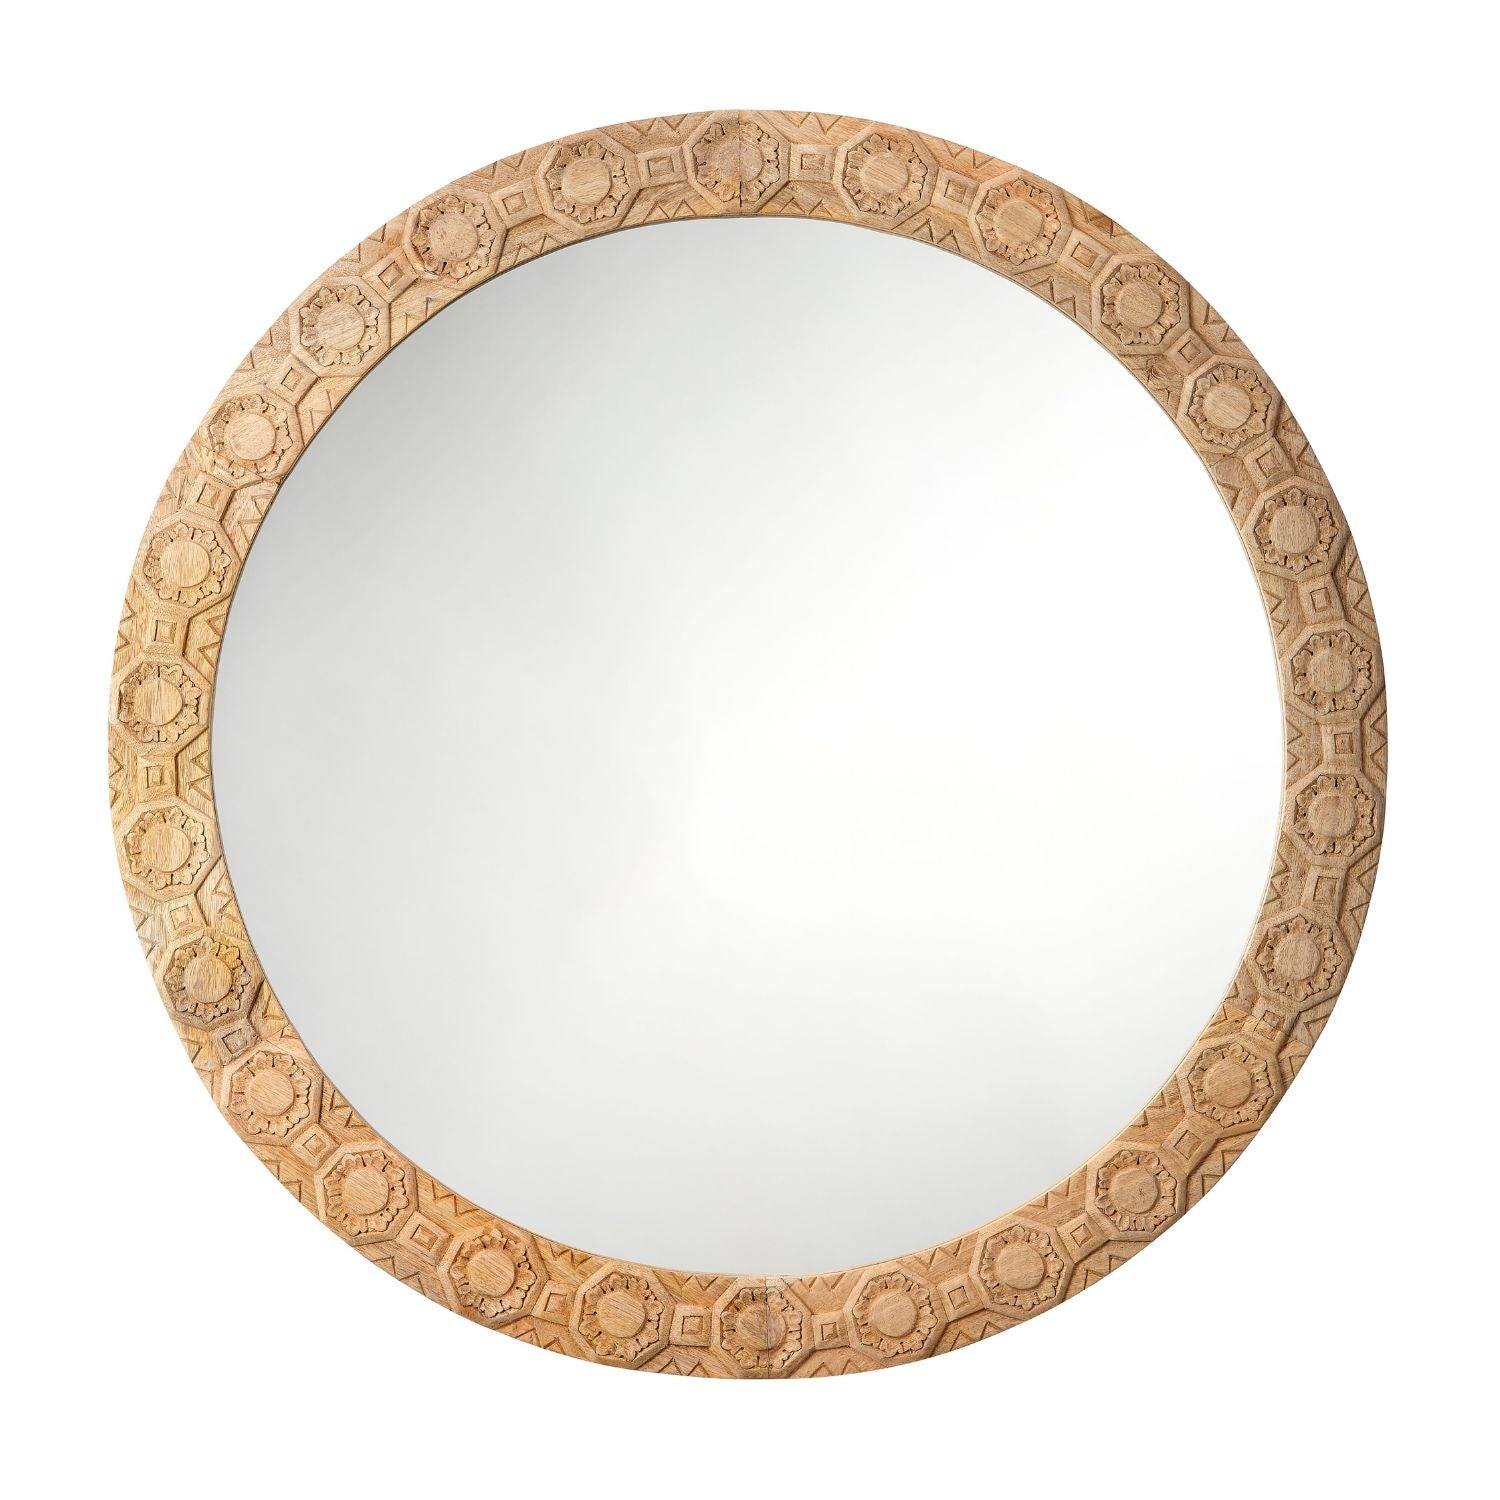 Relief Wood Carved Round Mirror